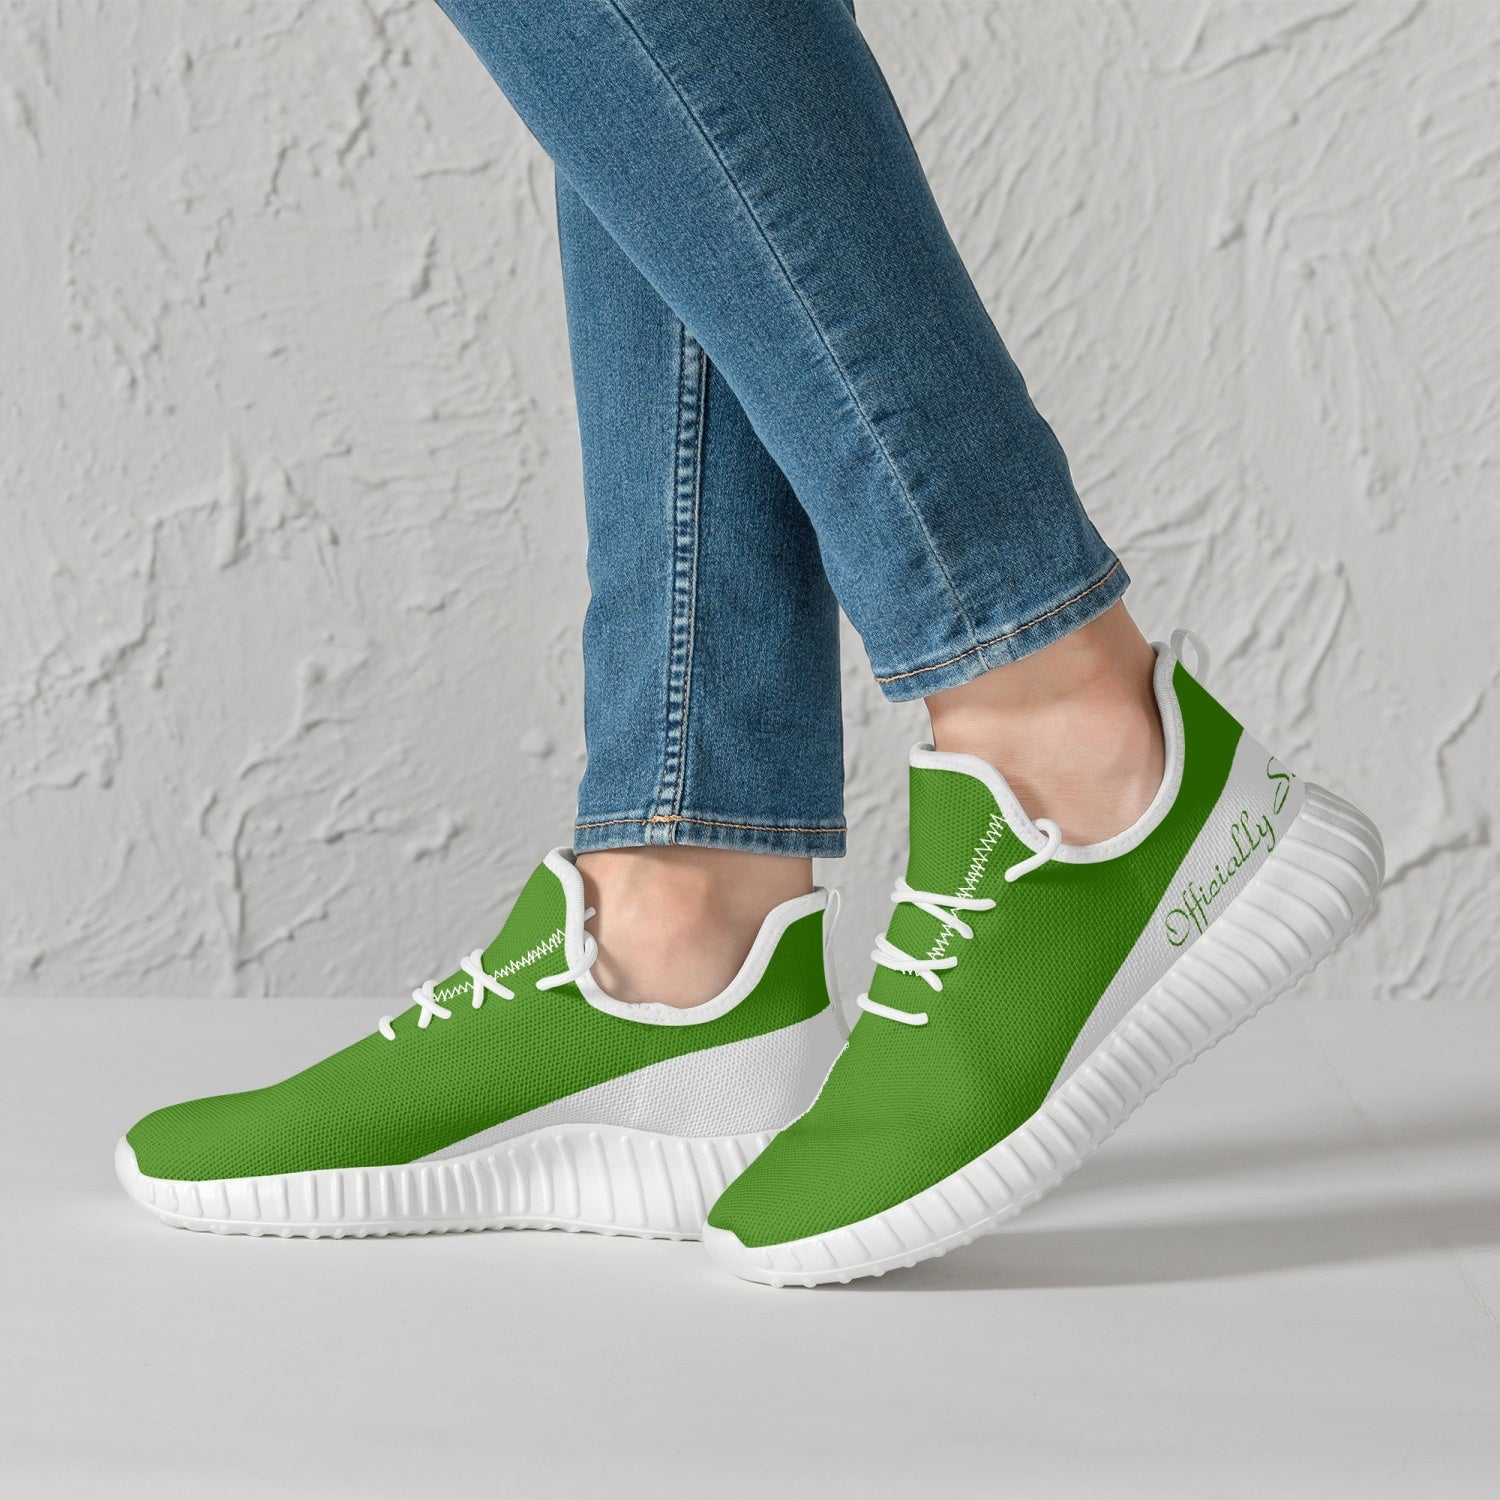 Officially Sexy Green & White Laser Mesh Knit Sneakers - With White or Black Sole